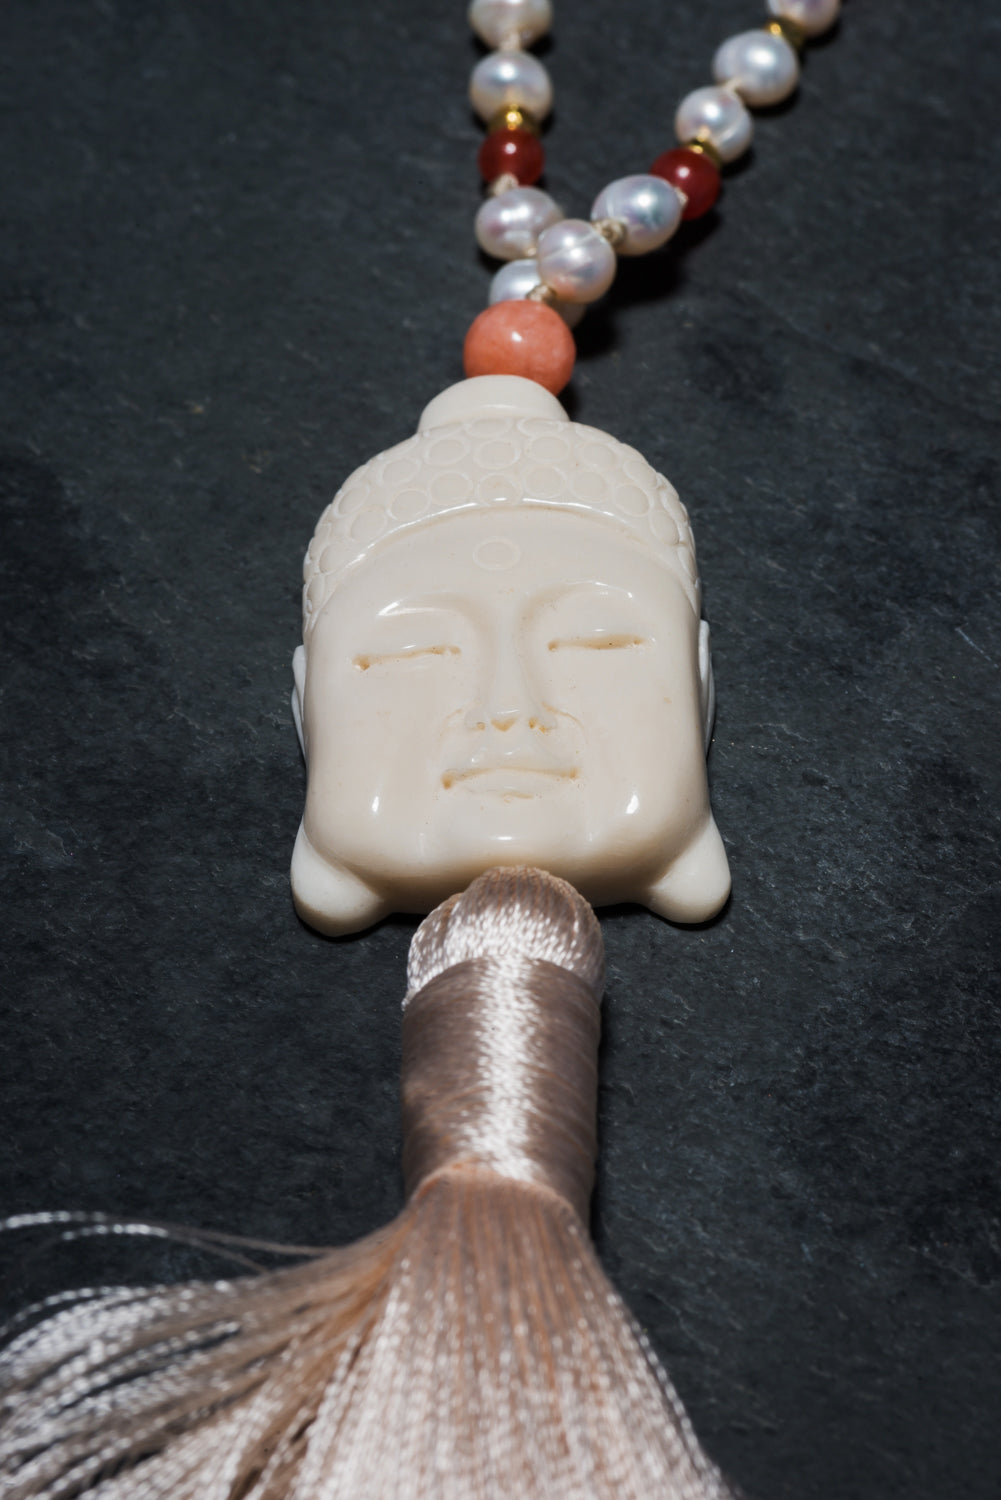 PEARL CORAL CARVED BUDDHA